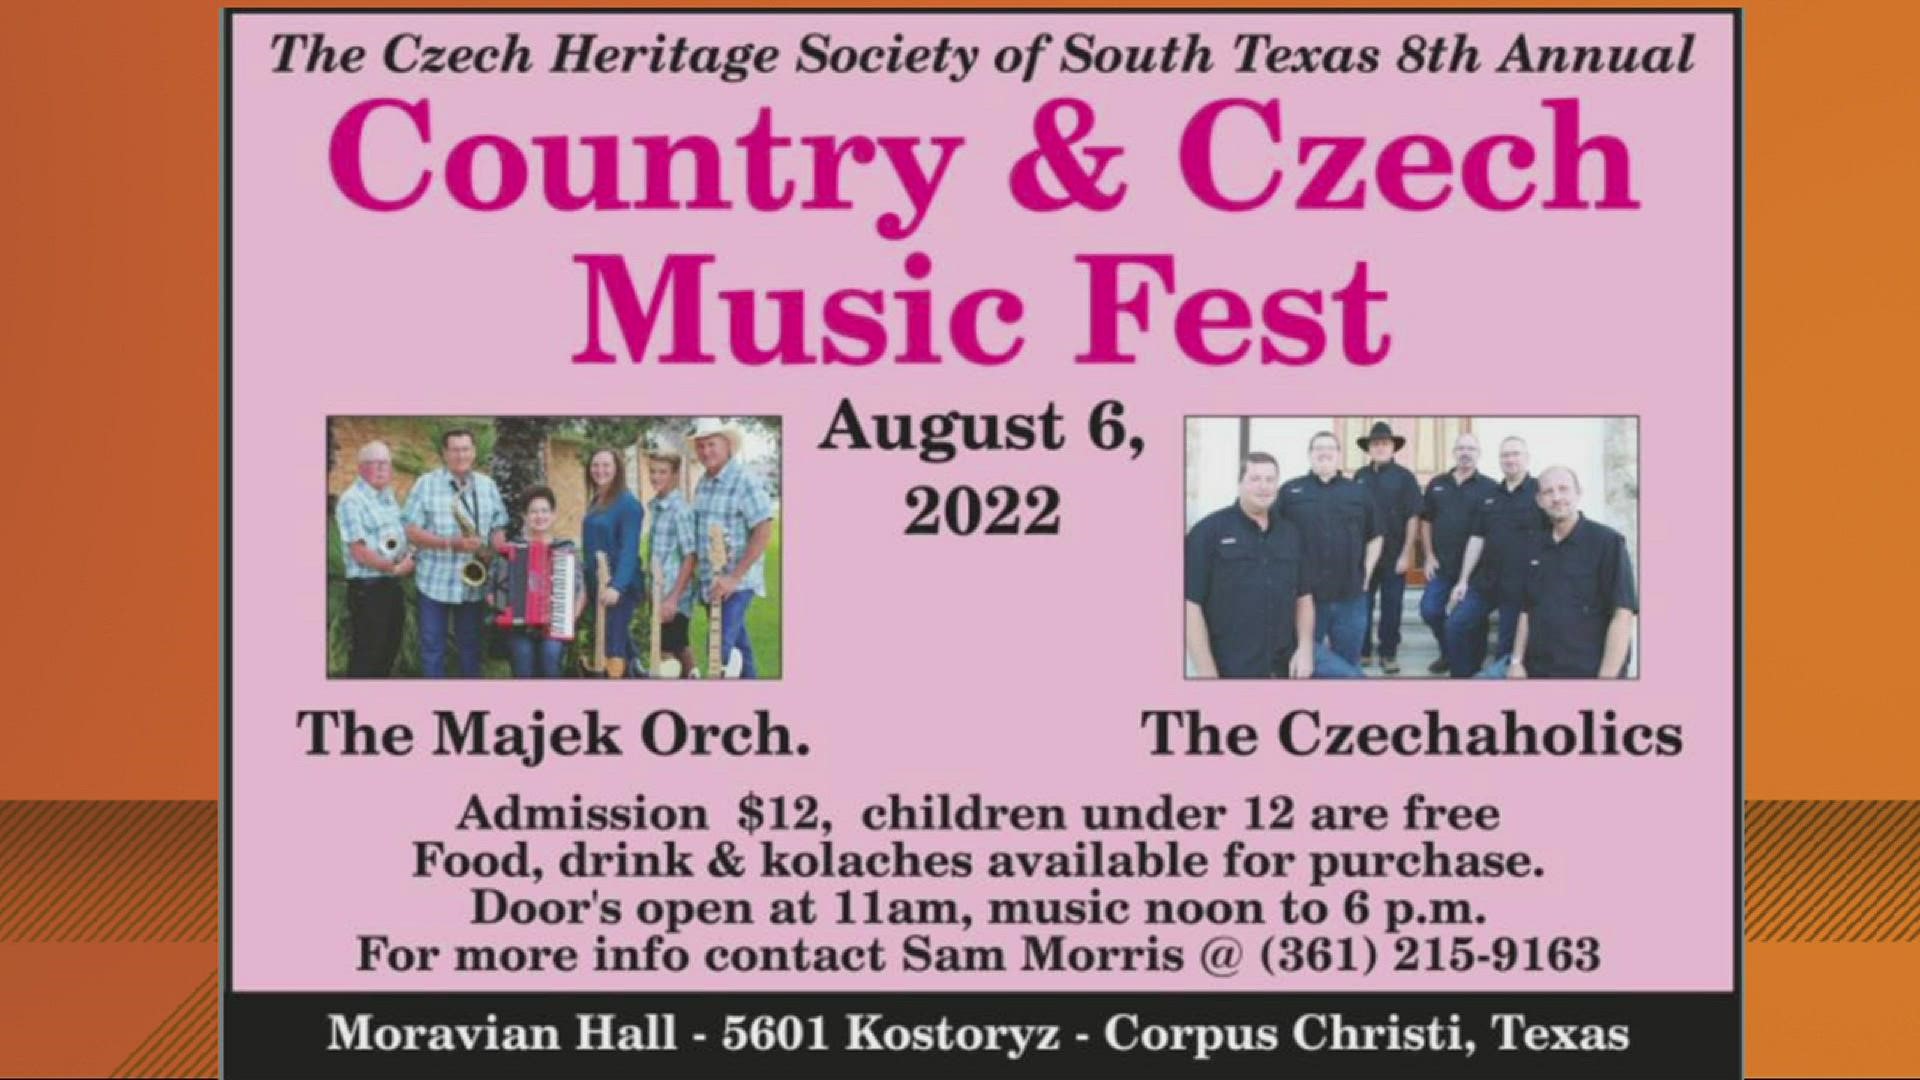 The Czech Heritage Society of South Texas 8th annual Country & Czech Music Fest takes place Saturday!